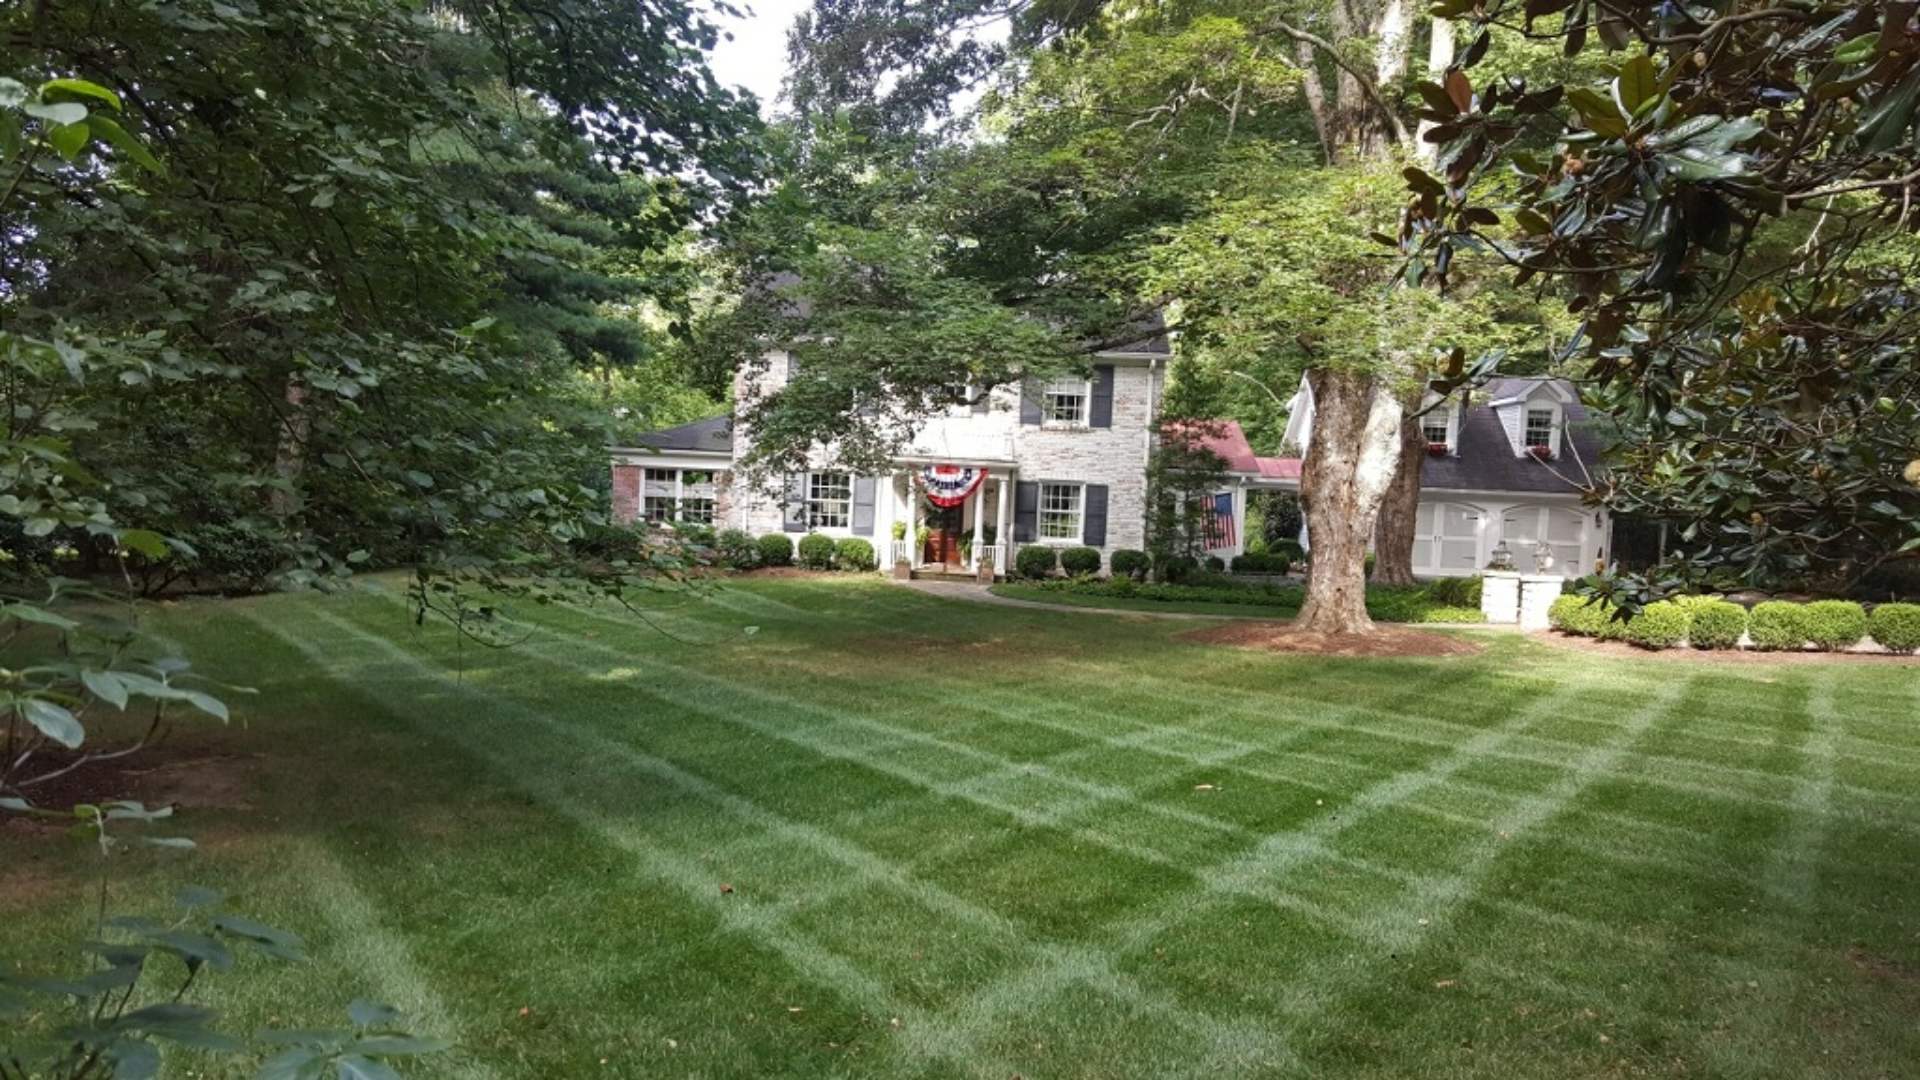 Home with freshly mowed lawn with patterns in Douglass Hills, KY.